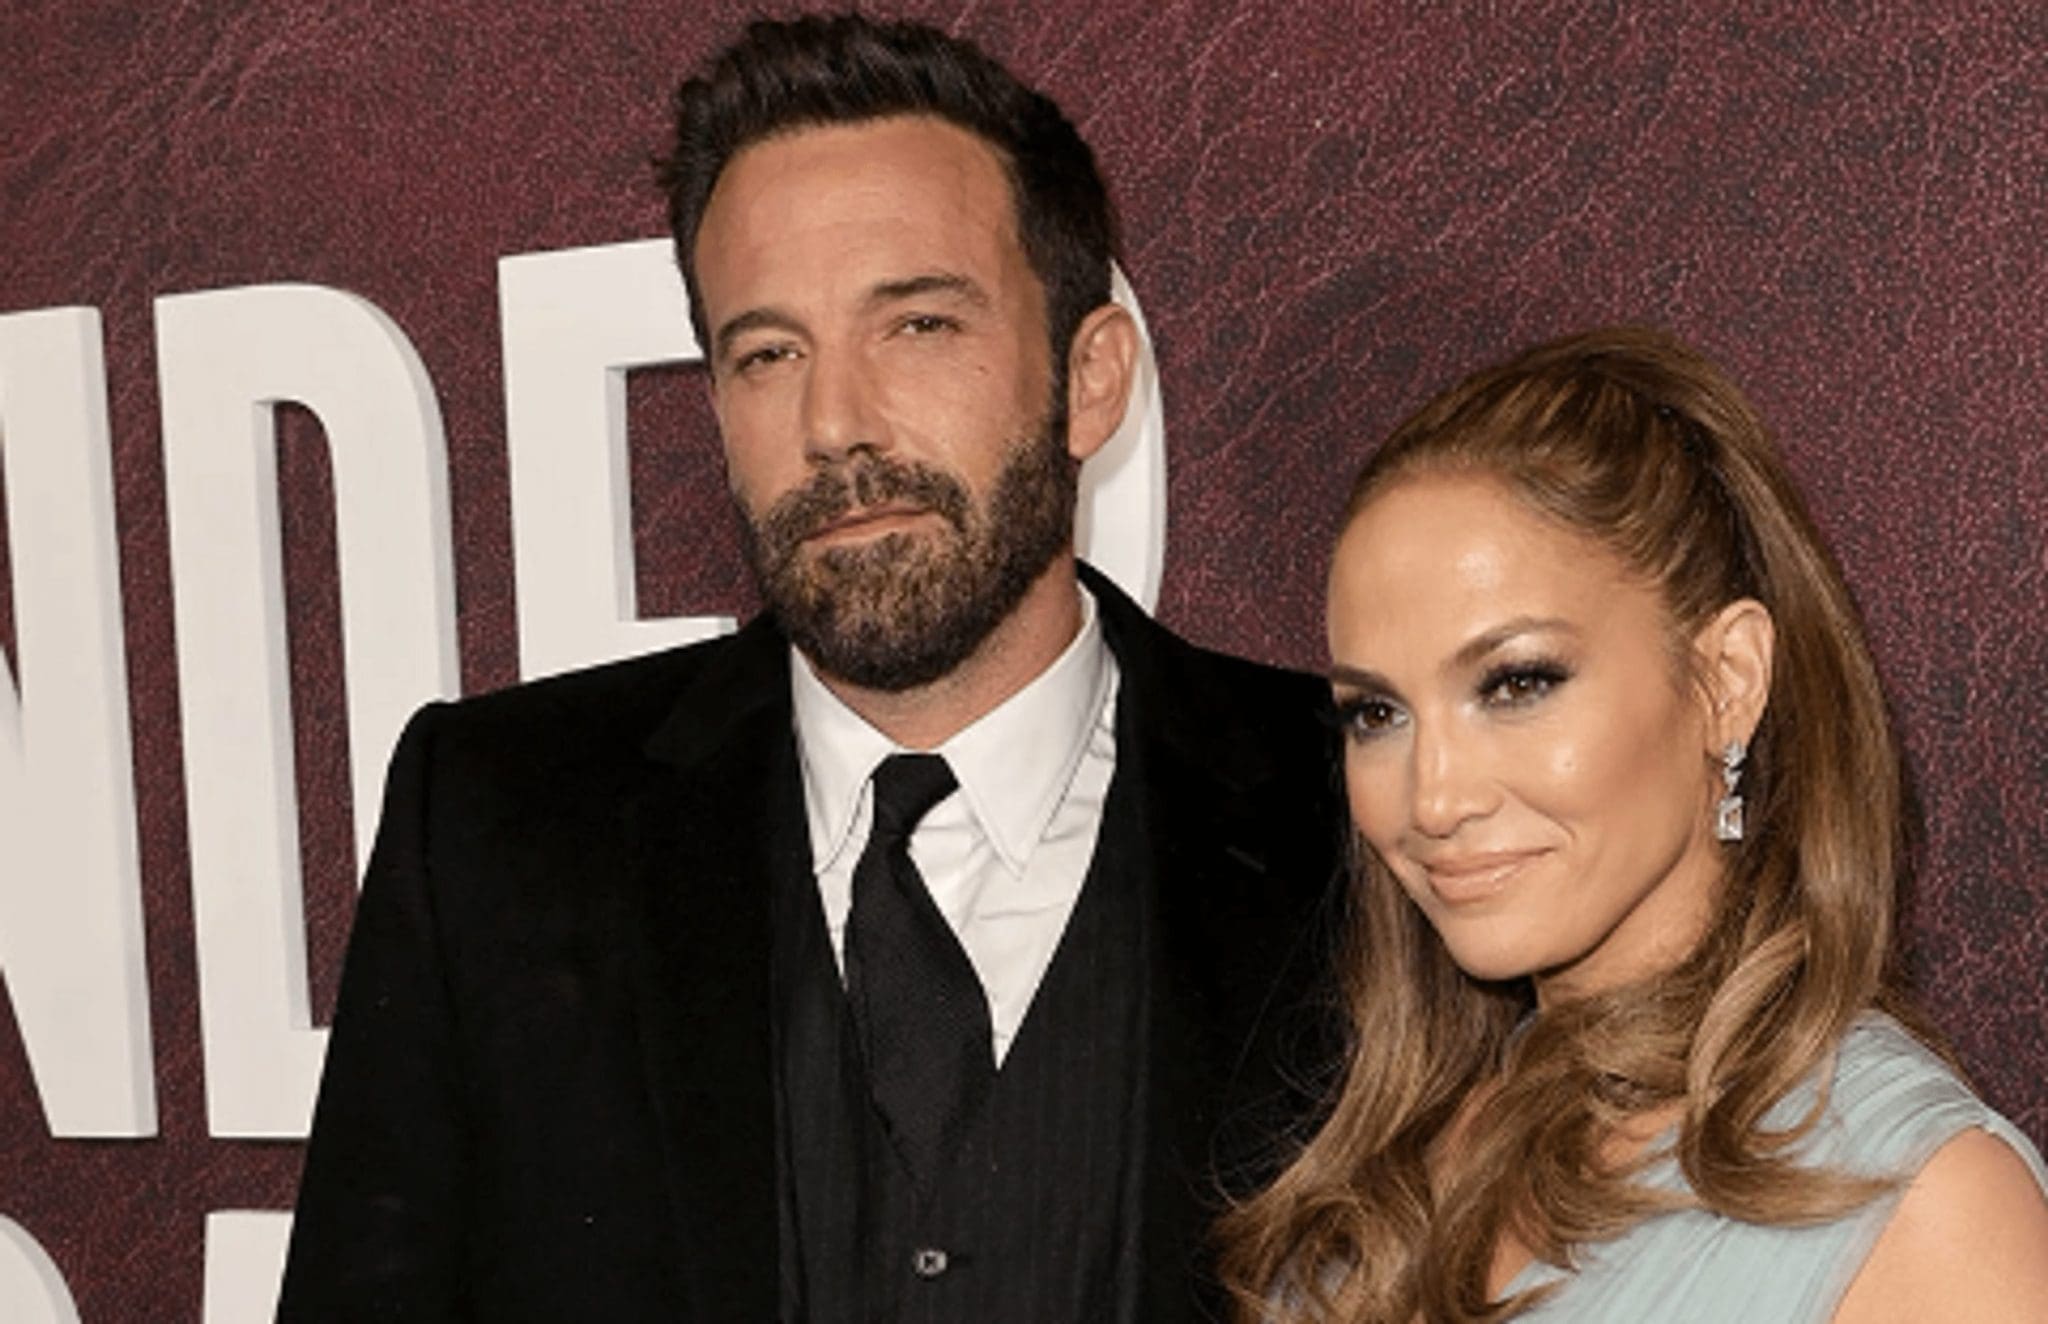 Following Their Marriage, Jennifer Lopez And Ben Affleck Are Taking Some Time Separately